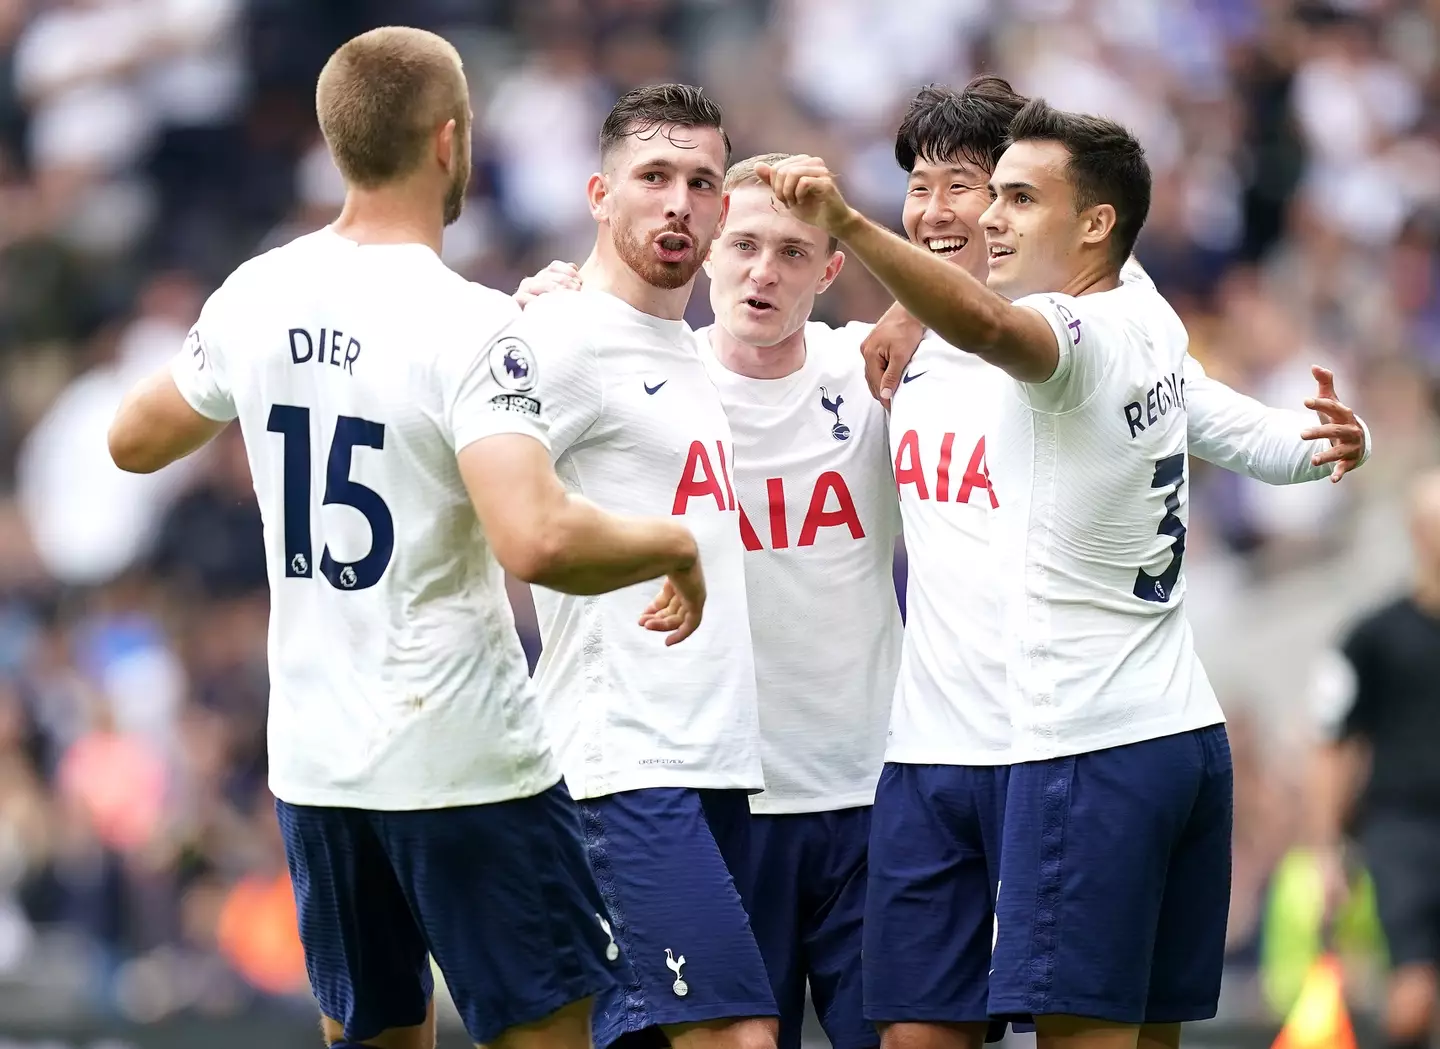 Tottenham started the new Premier League season with three straight victories